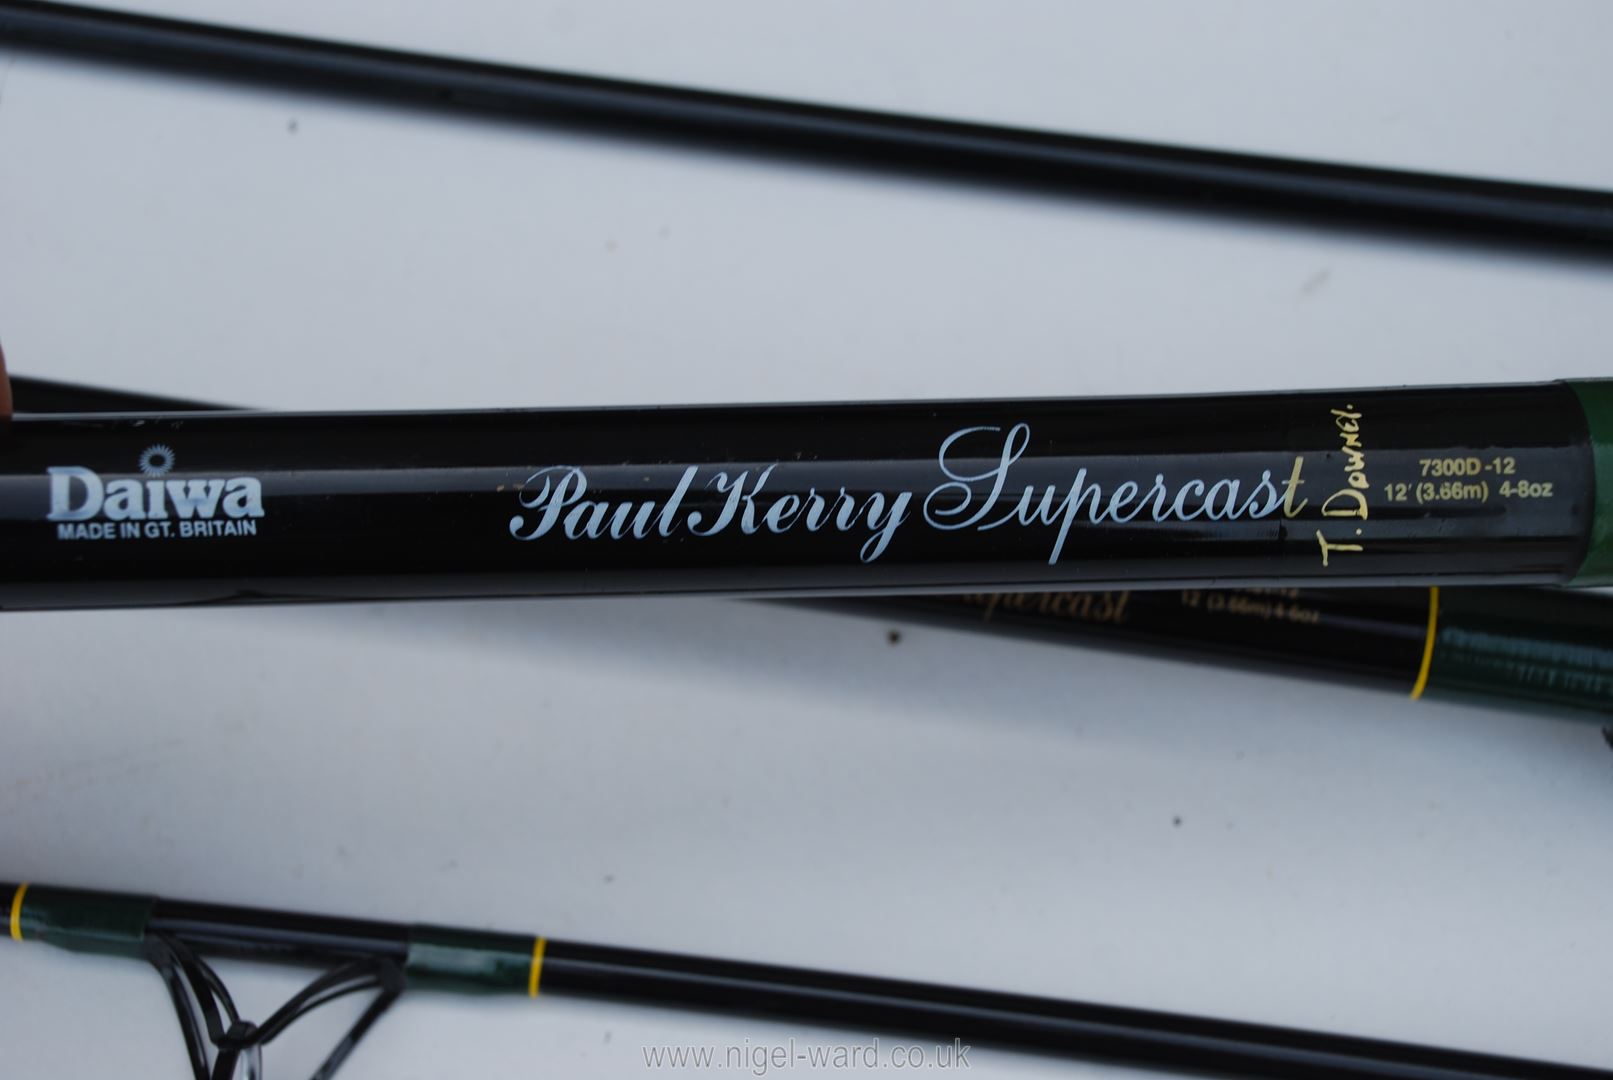 Two Daiwa Paul Kerry Supercast beach rods, one marked 'T. Downey', both 12', one in canvas sleeve. - Image 3 of 3